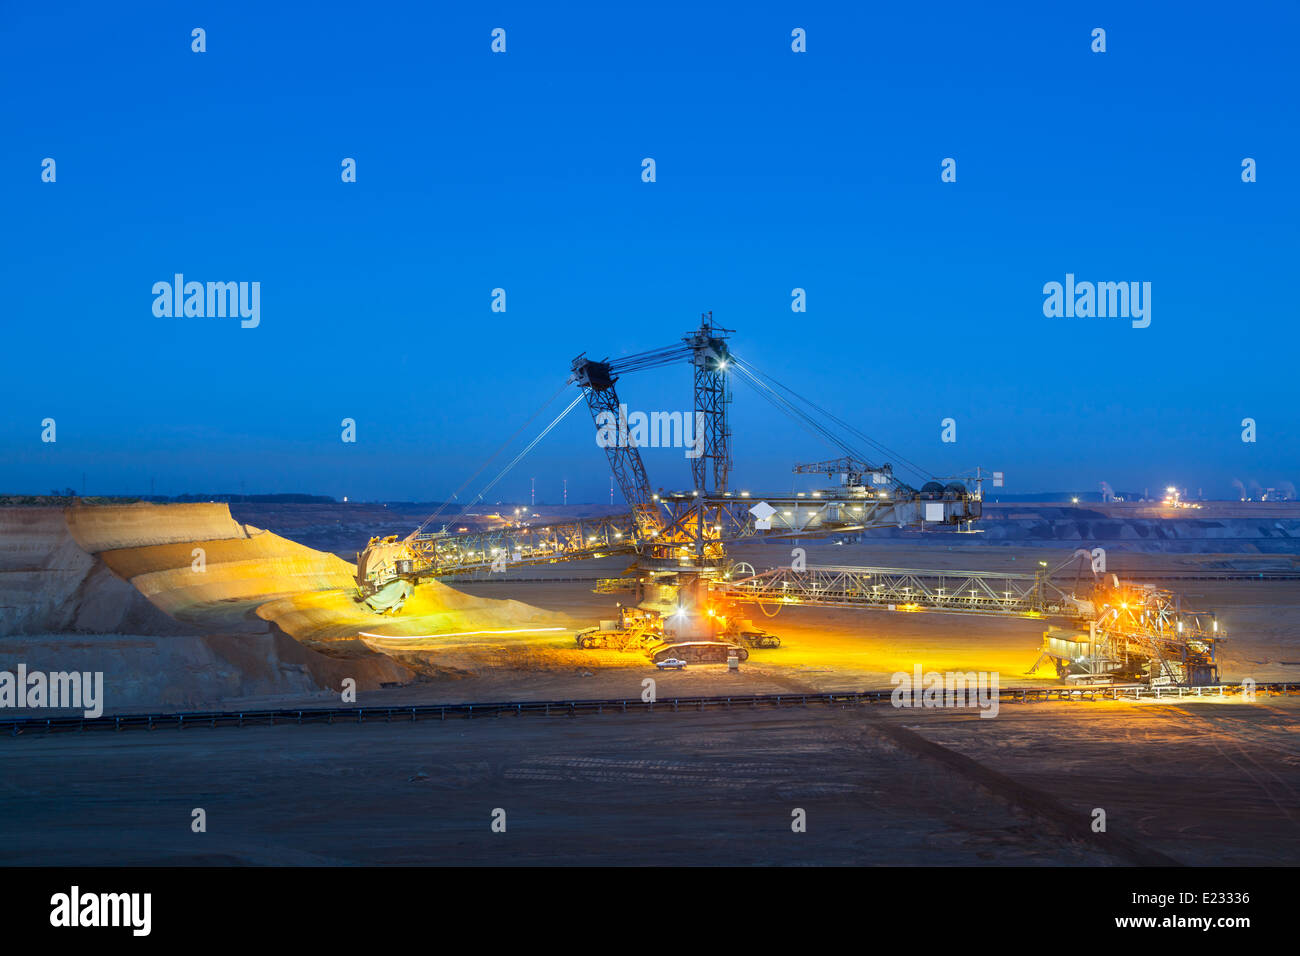 A giant Bucket Wheel Excavator at work in a lignite pit mine at night Stock Photo